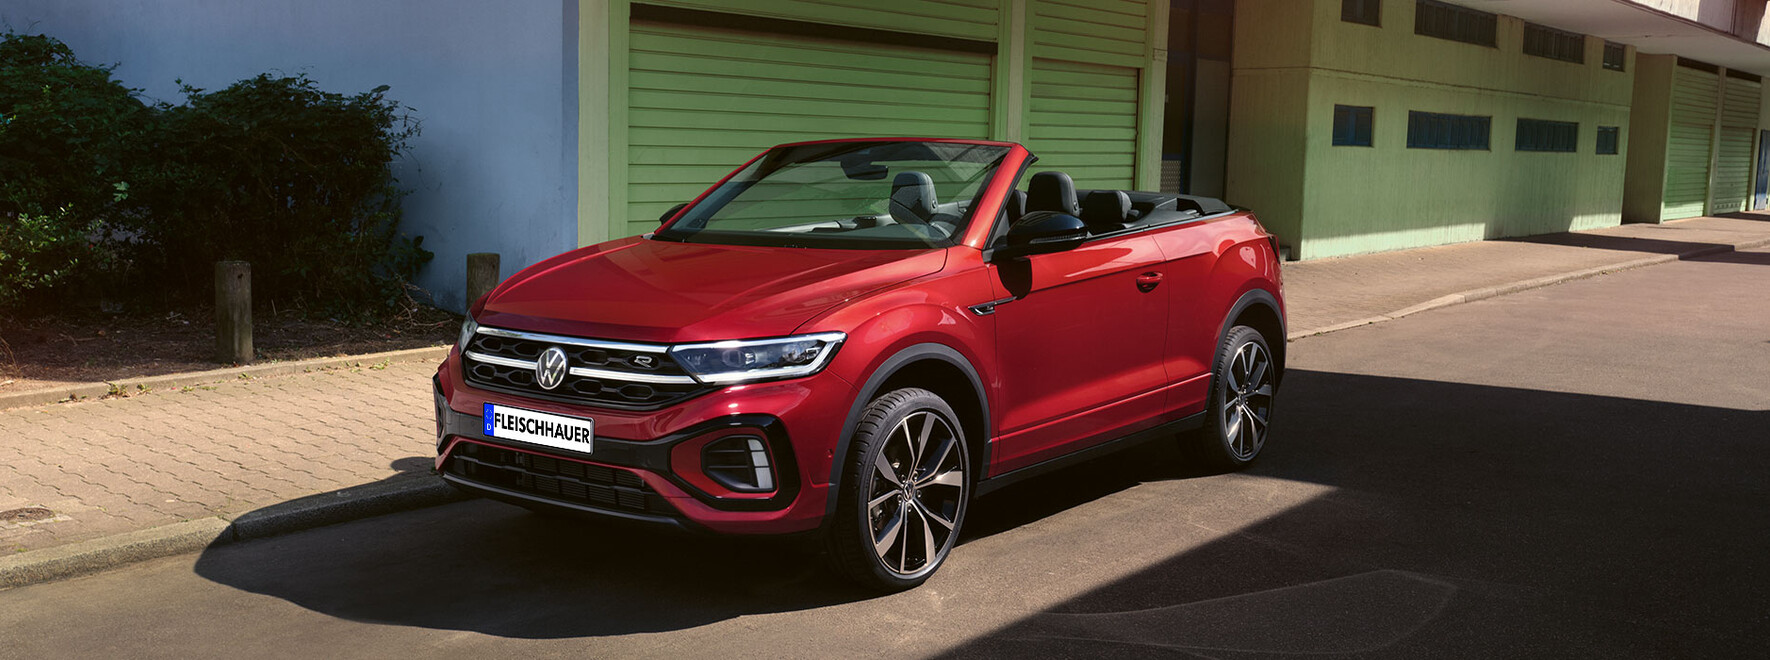 T-Roc Cabriolet Style 1.0 l TSI OPF 85 kW (116 PS) 6-Gang | 